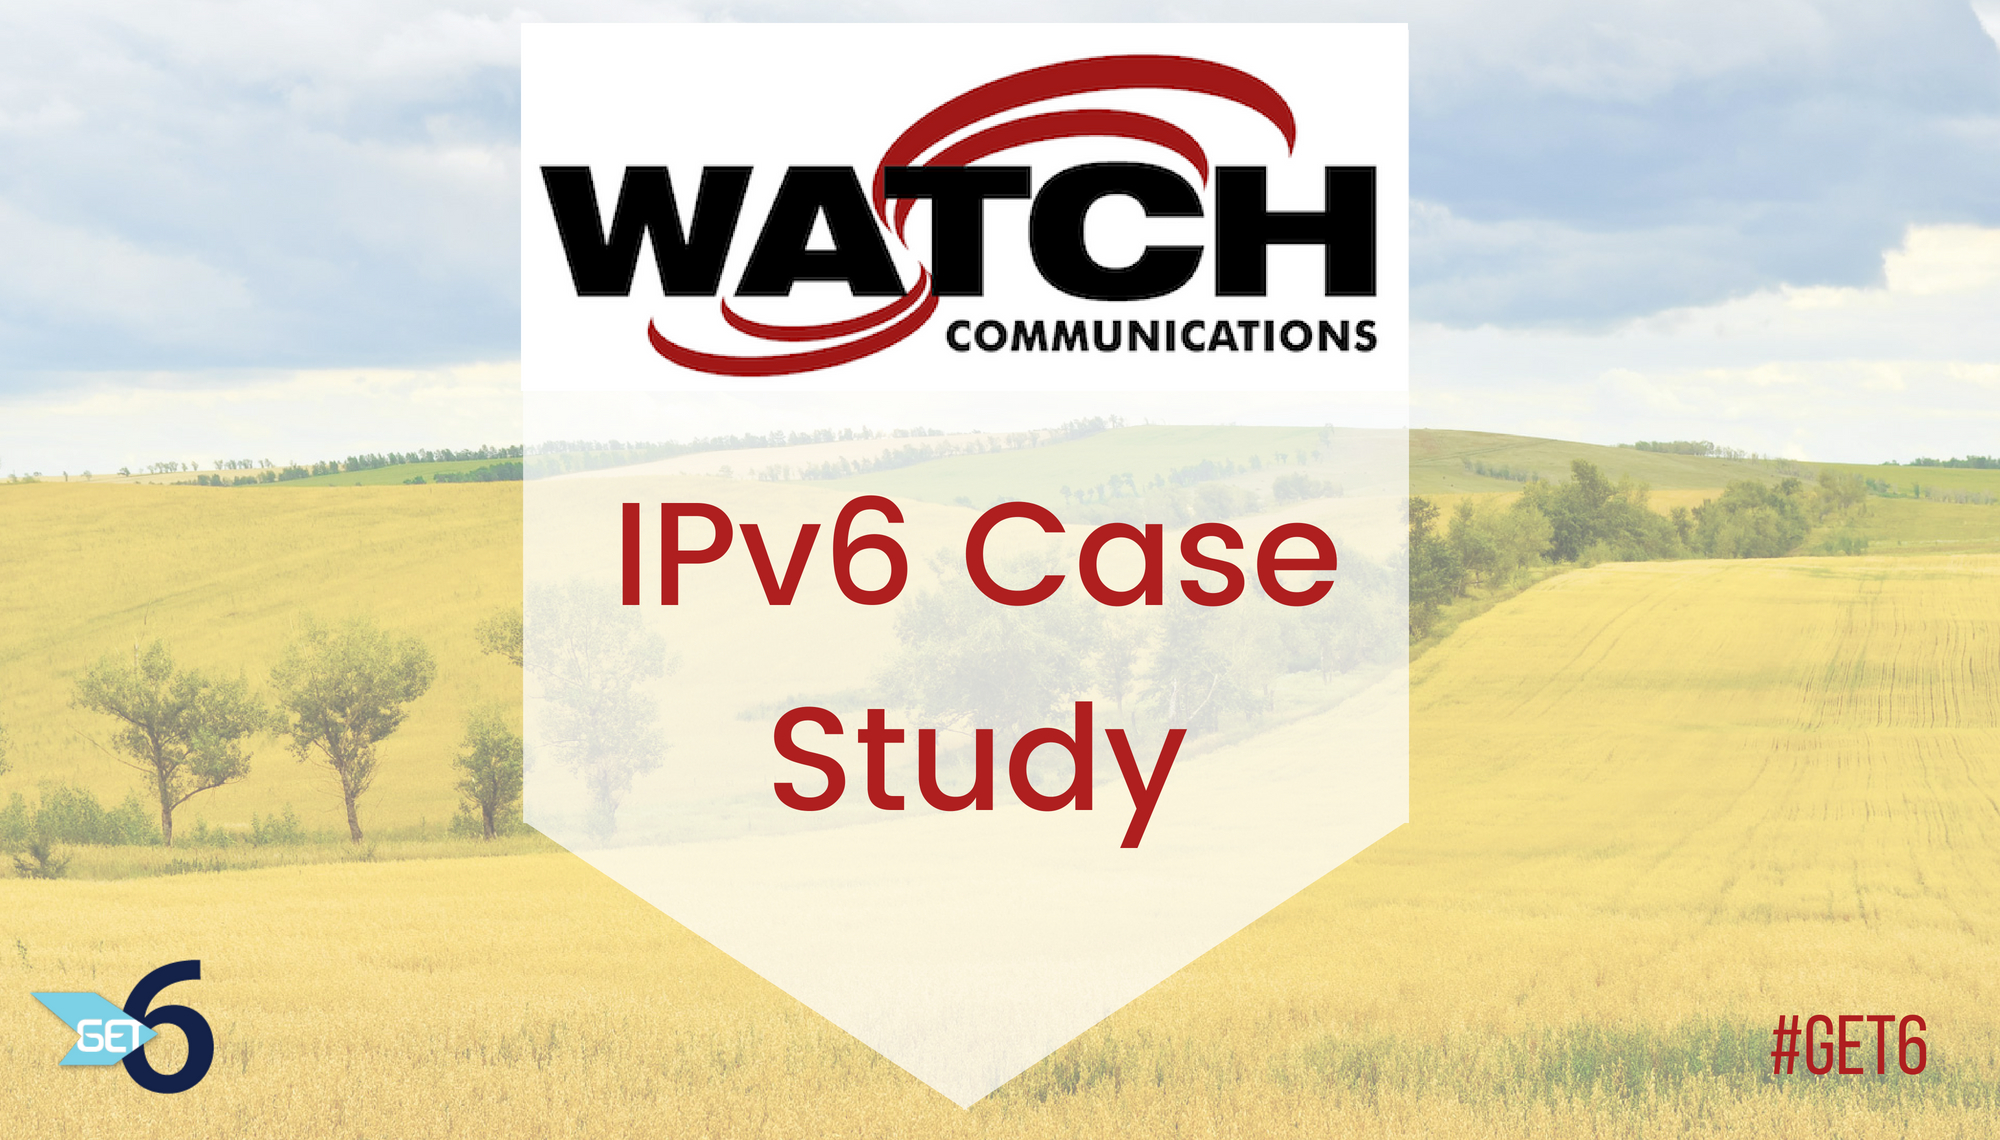 Make IPv6 Work For You, Not Against You